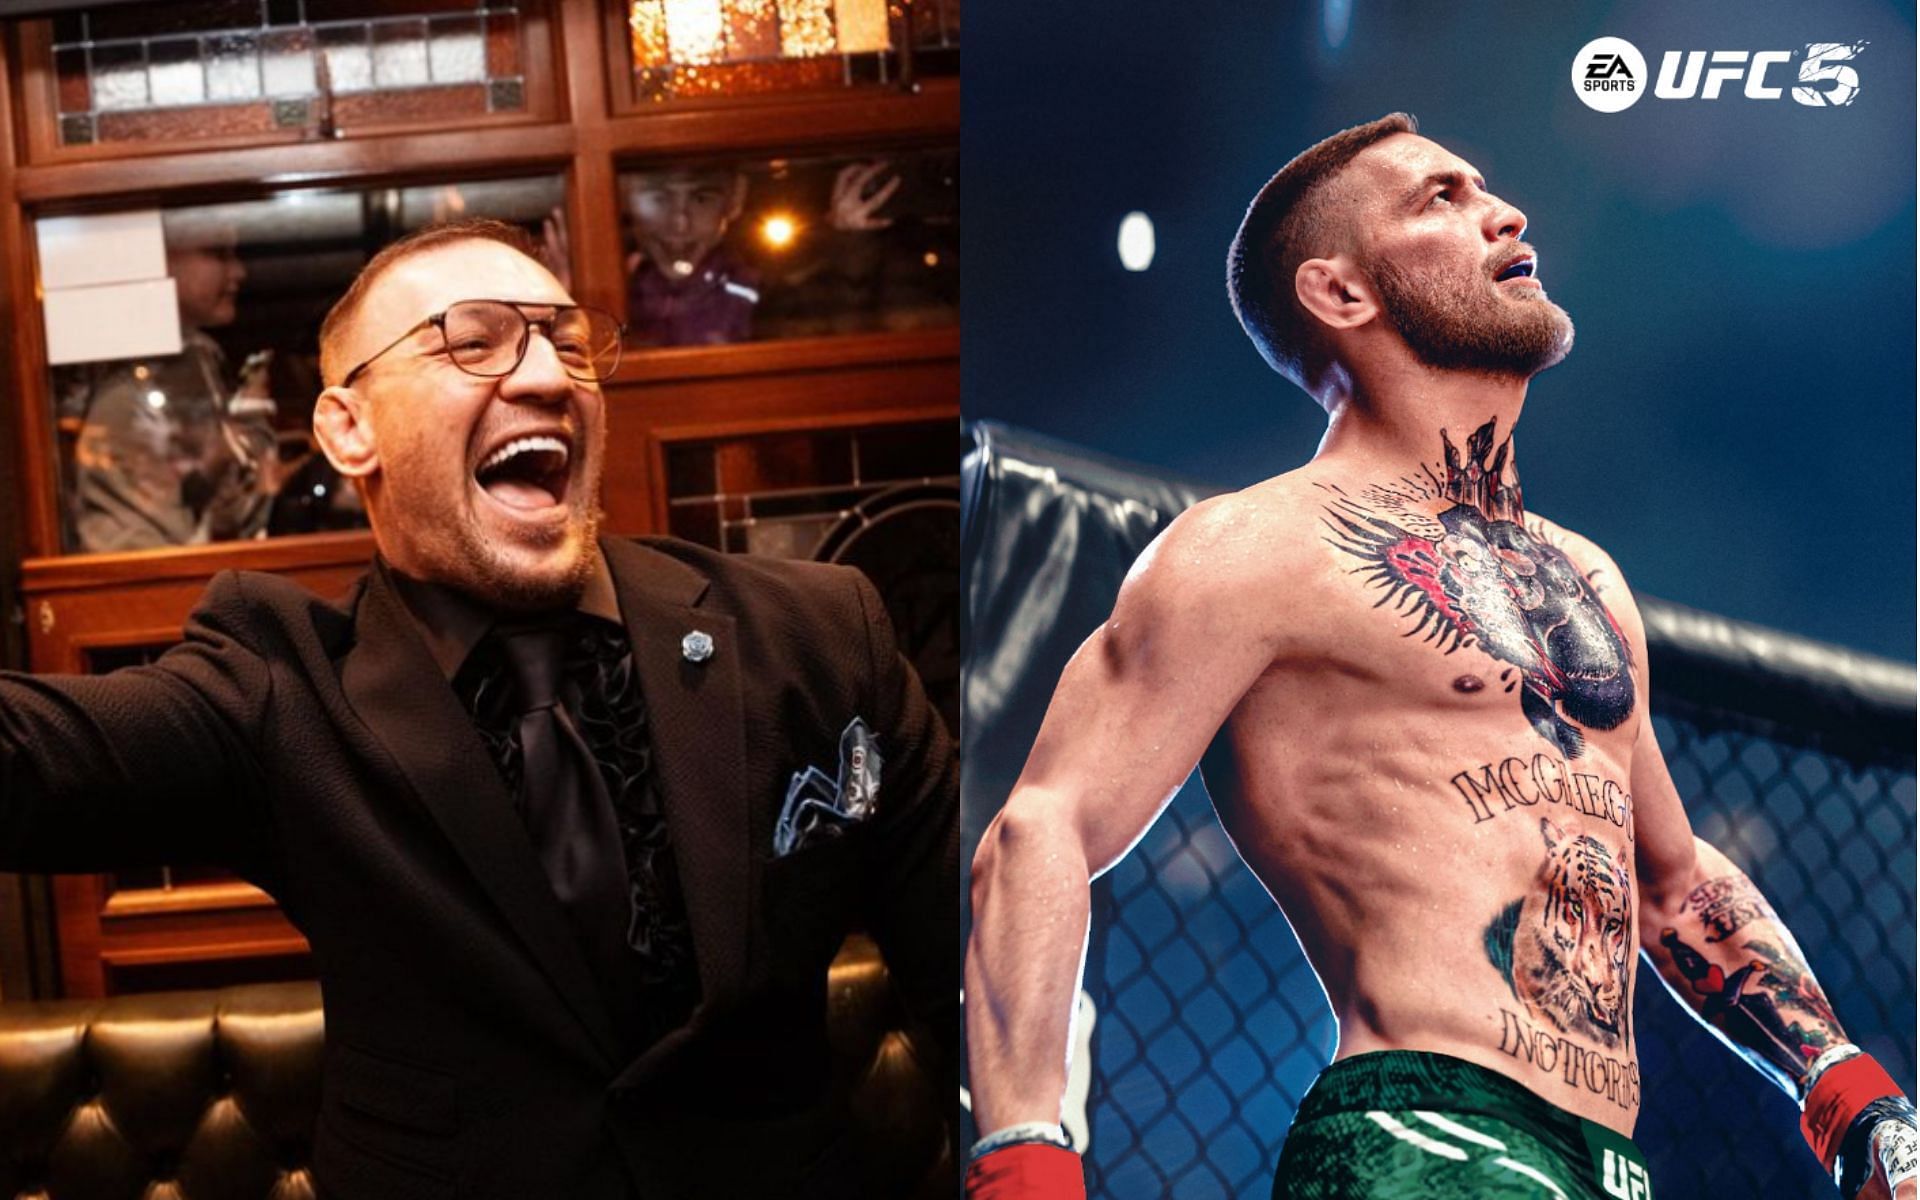 Conor McGregor (left) is happy with the new appearance upgrade of his character in EA Sports UFC 5 (right). [Image credit: @thenotoriousmma on Instagram, @EASPORTSUFC on X]